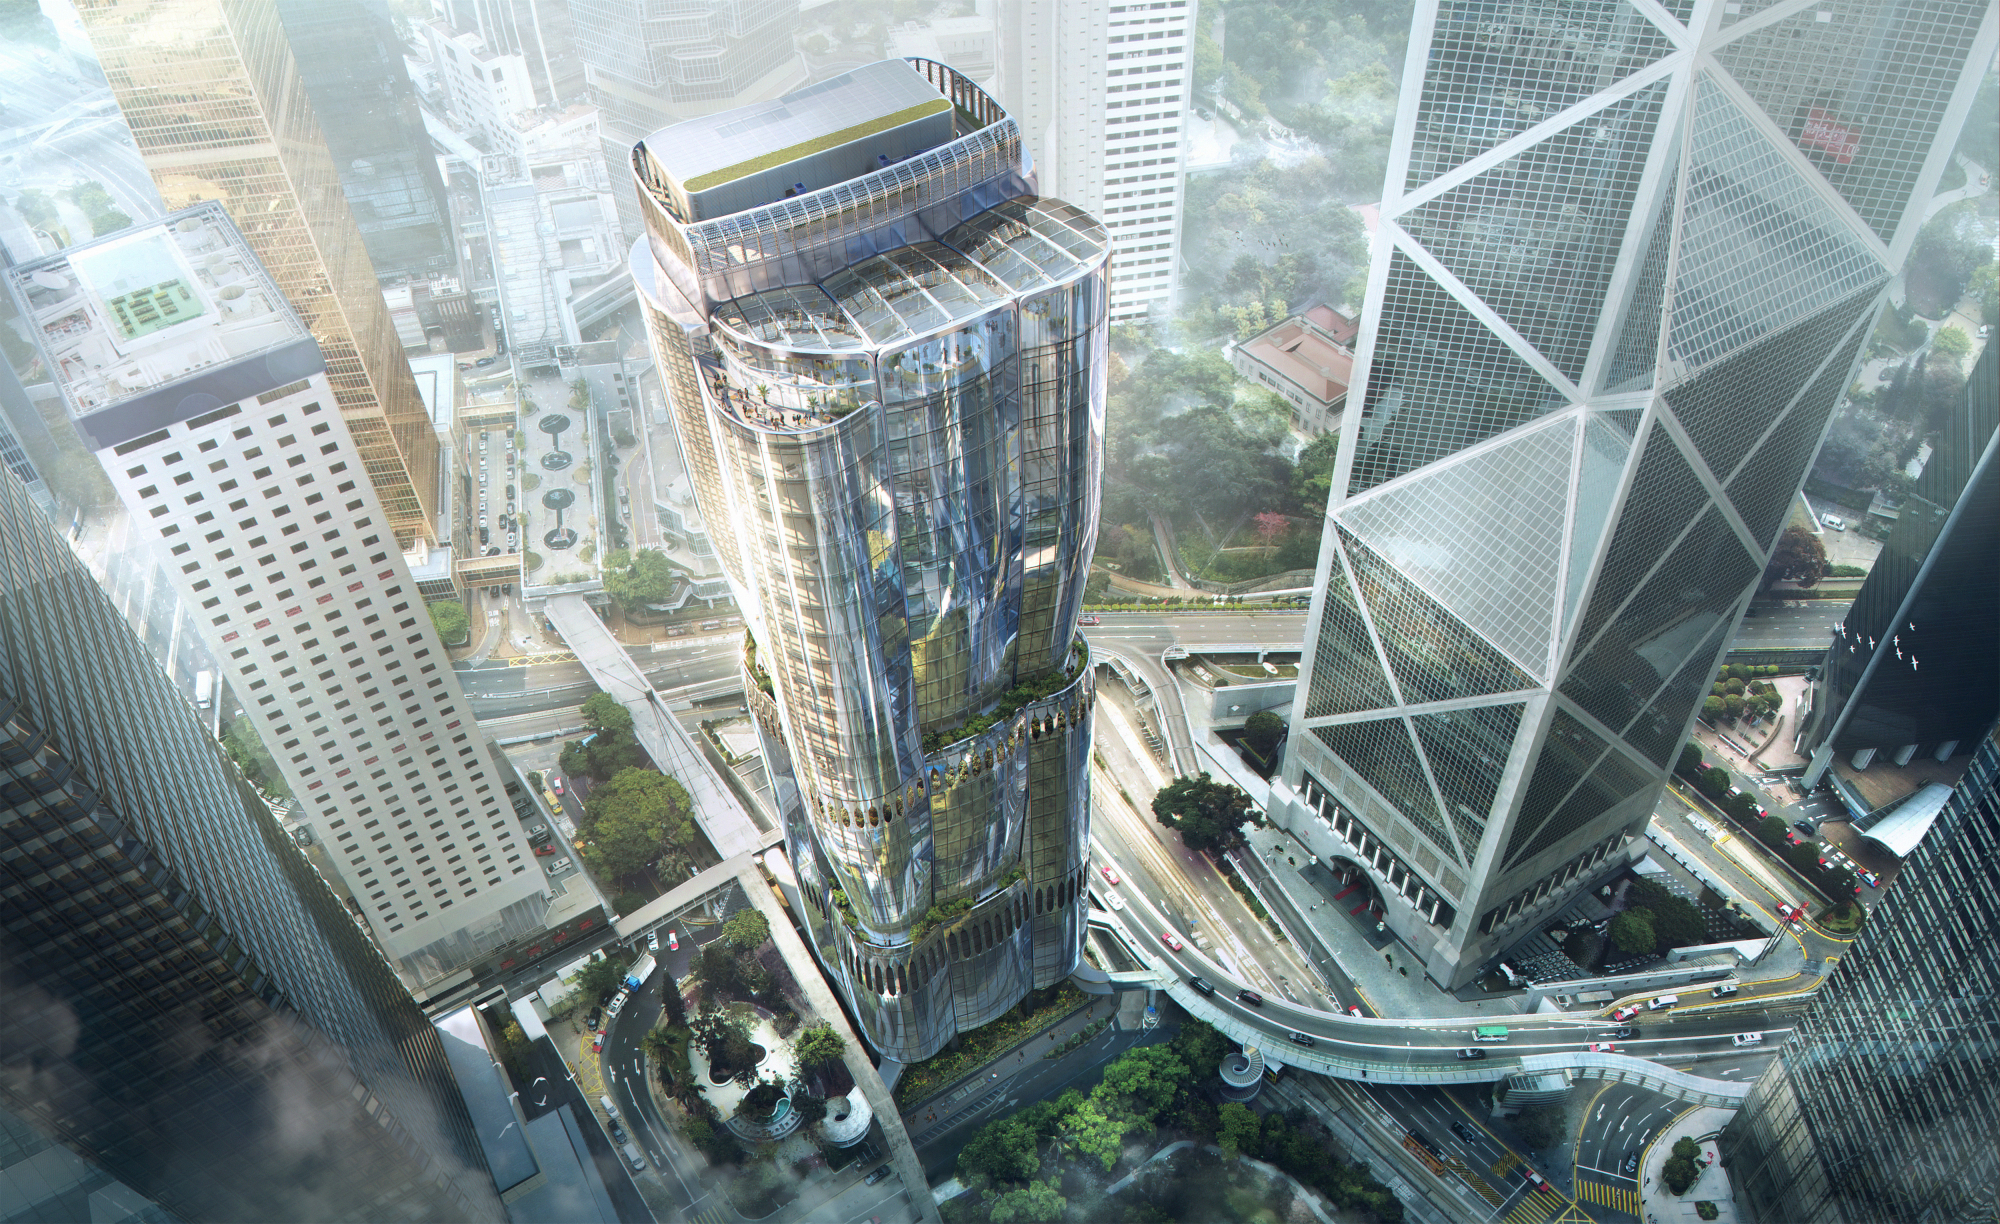 CHRISTIE’S STEPS UP ITS INVESTMENT IN ASIA  IN RESPONSE TO GLOBAL MARKET DEMAND ANNOUNCES MOVE TO NEW ASIA PACIFIC HEADQUARTERS AT “THE HENDERSON” TOWER IN 2024